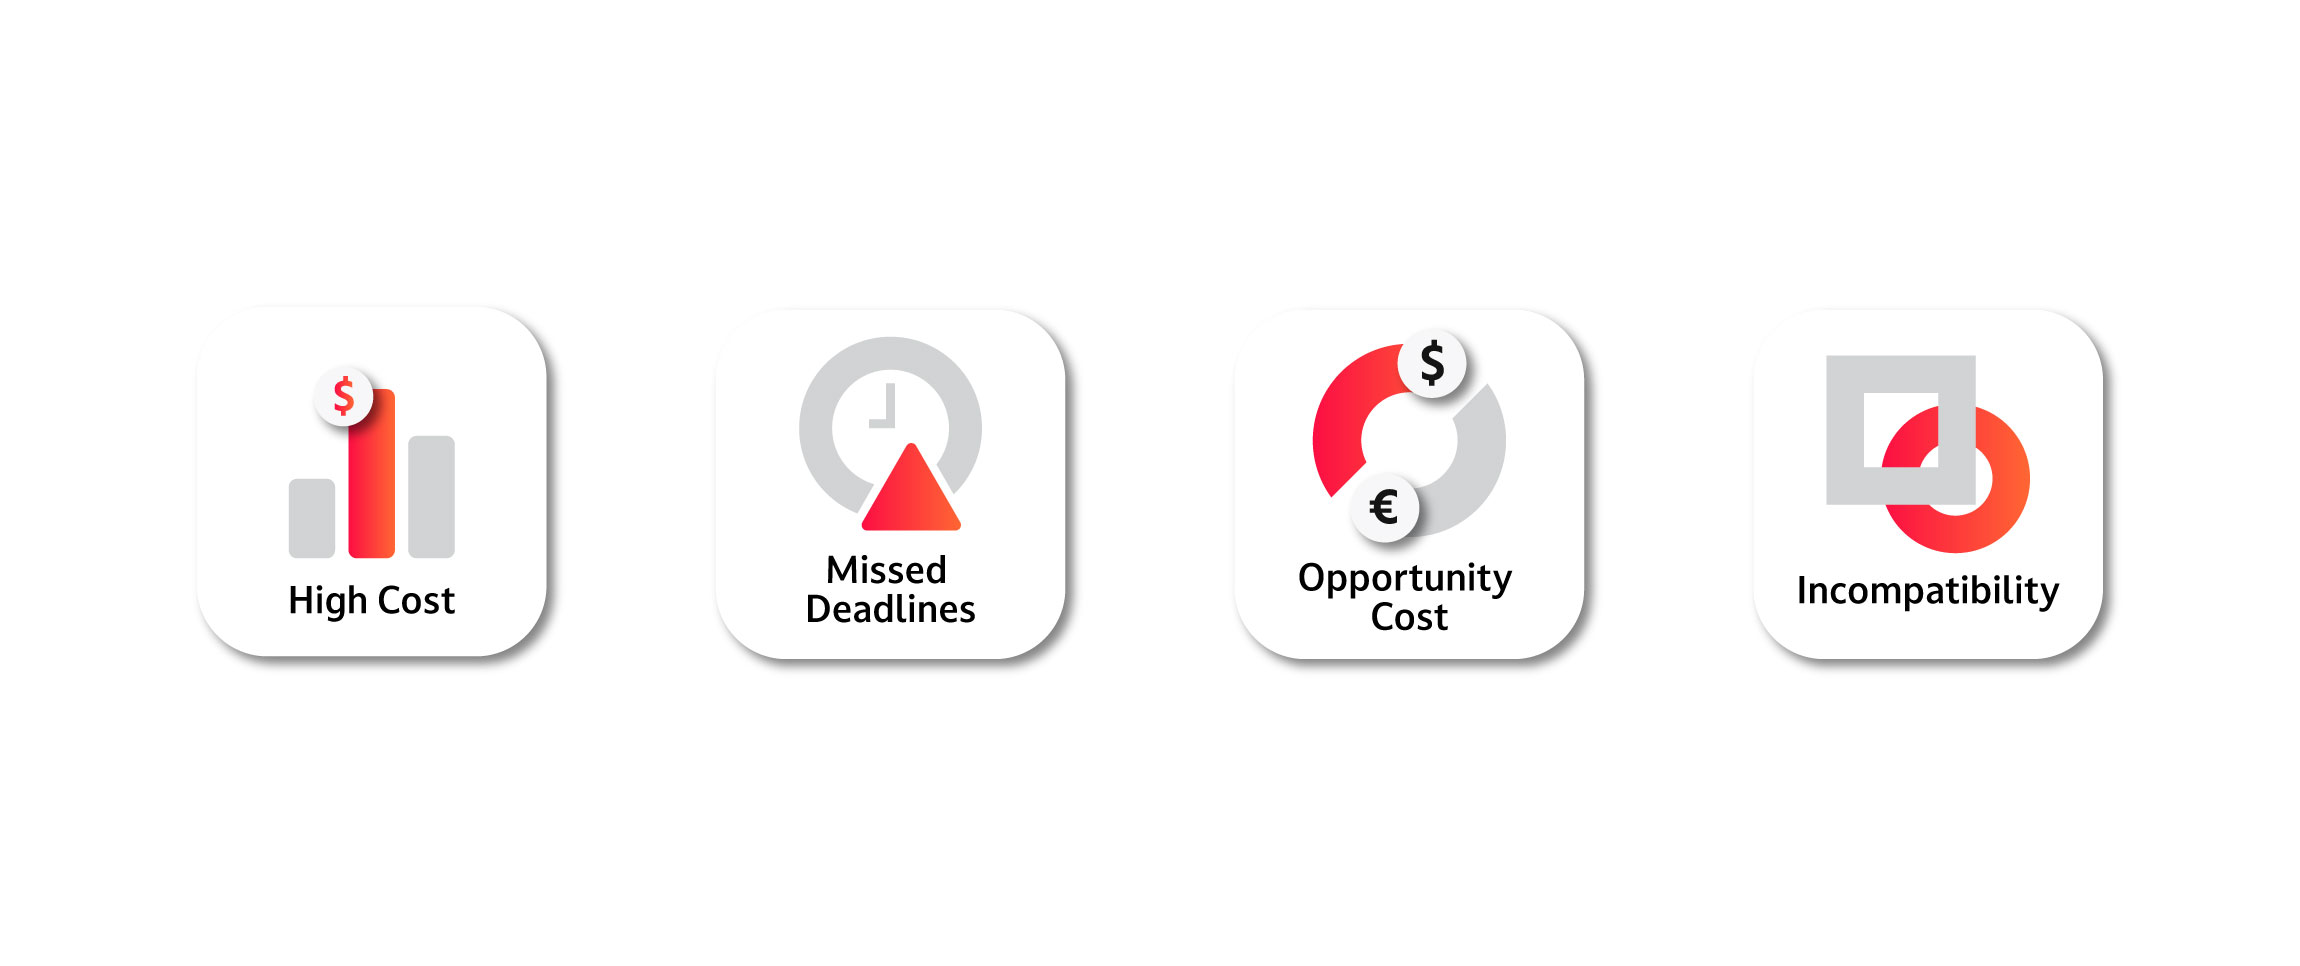 disadvantages like high cost, missed deadlines, opportunity cost, and incompatibility